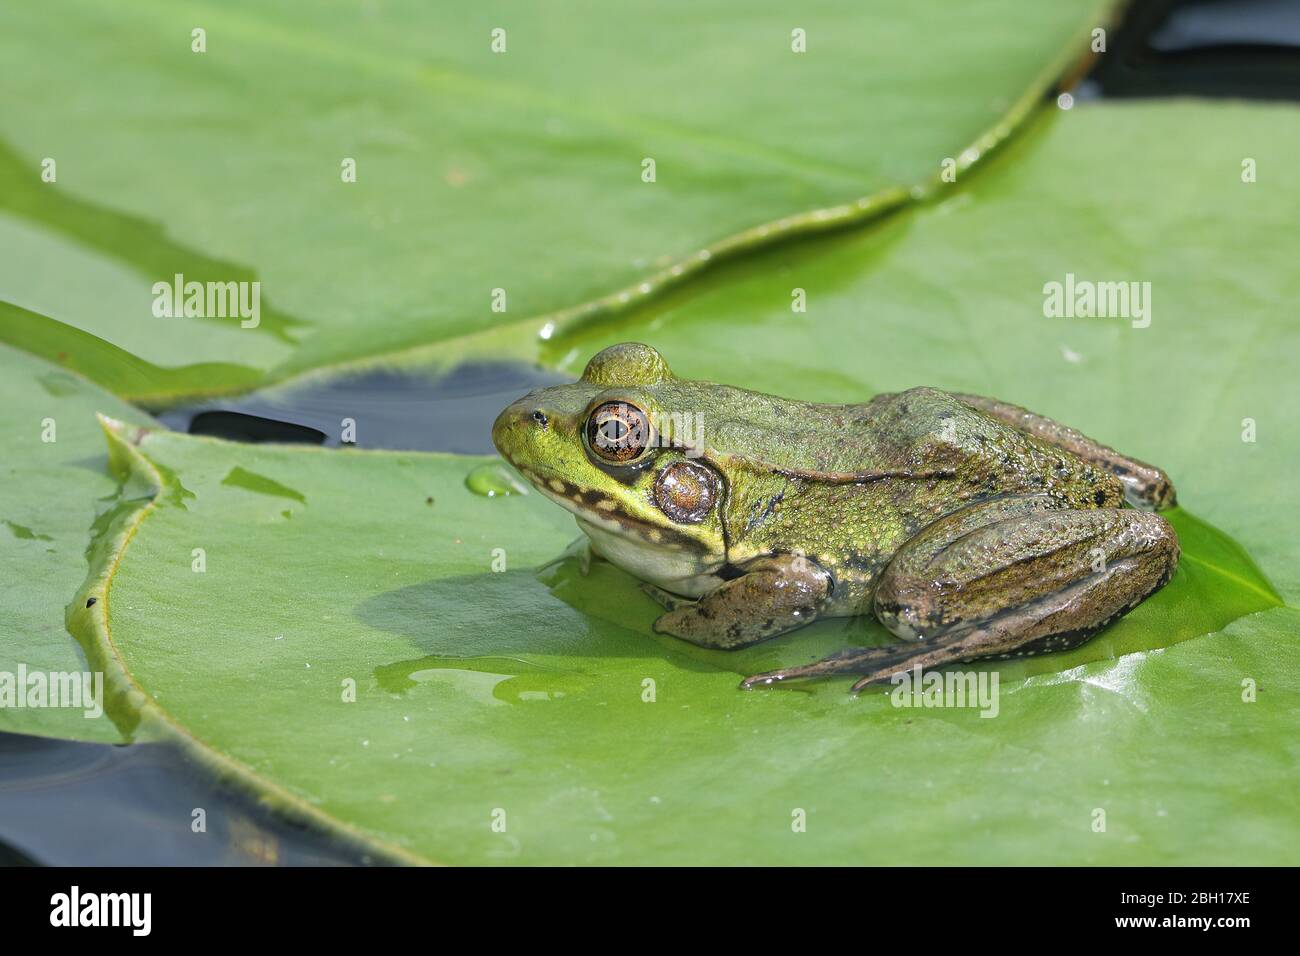 Green frog, Common spring frog (Rana clamitans, Lithobates clamitans), sits on water lily leaf, Canada, Ontario, Point Pelee National Park Stock Photo